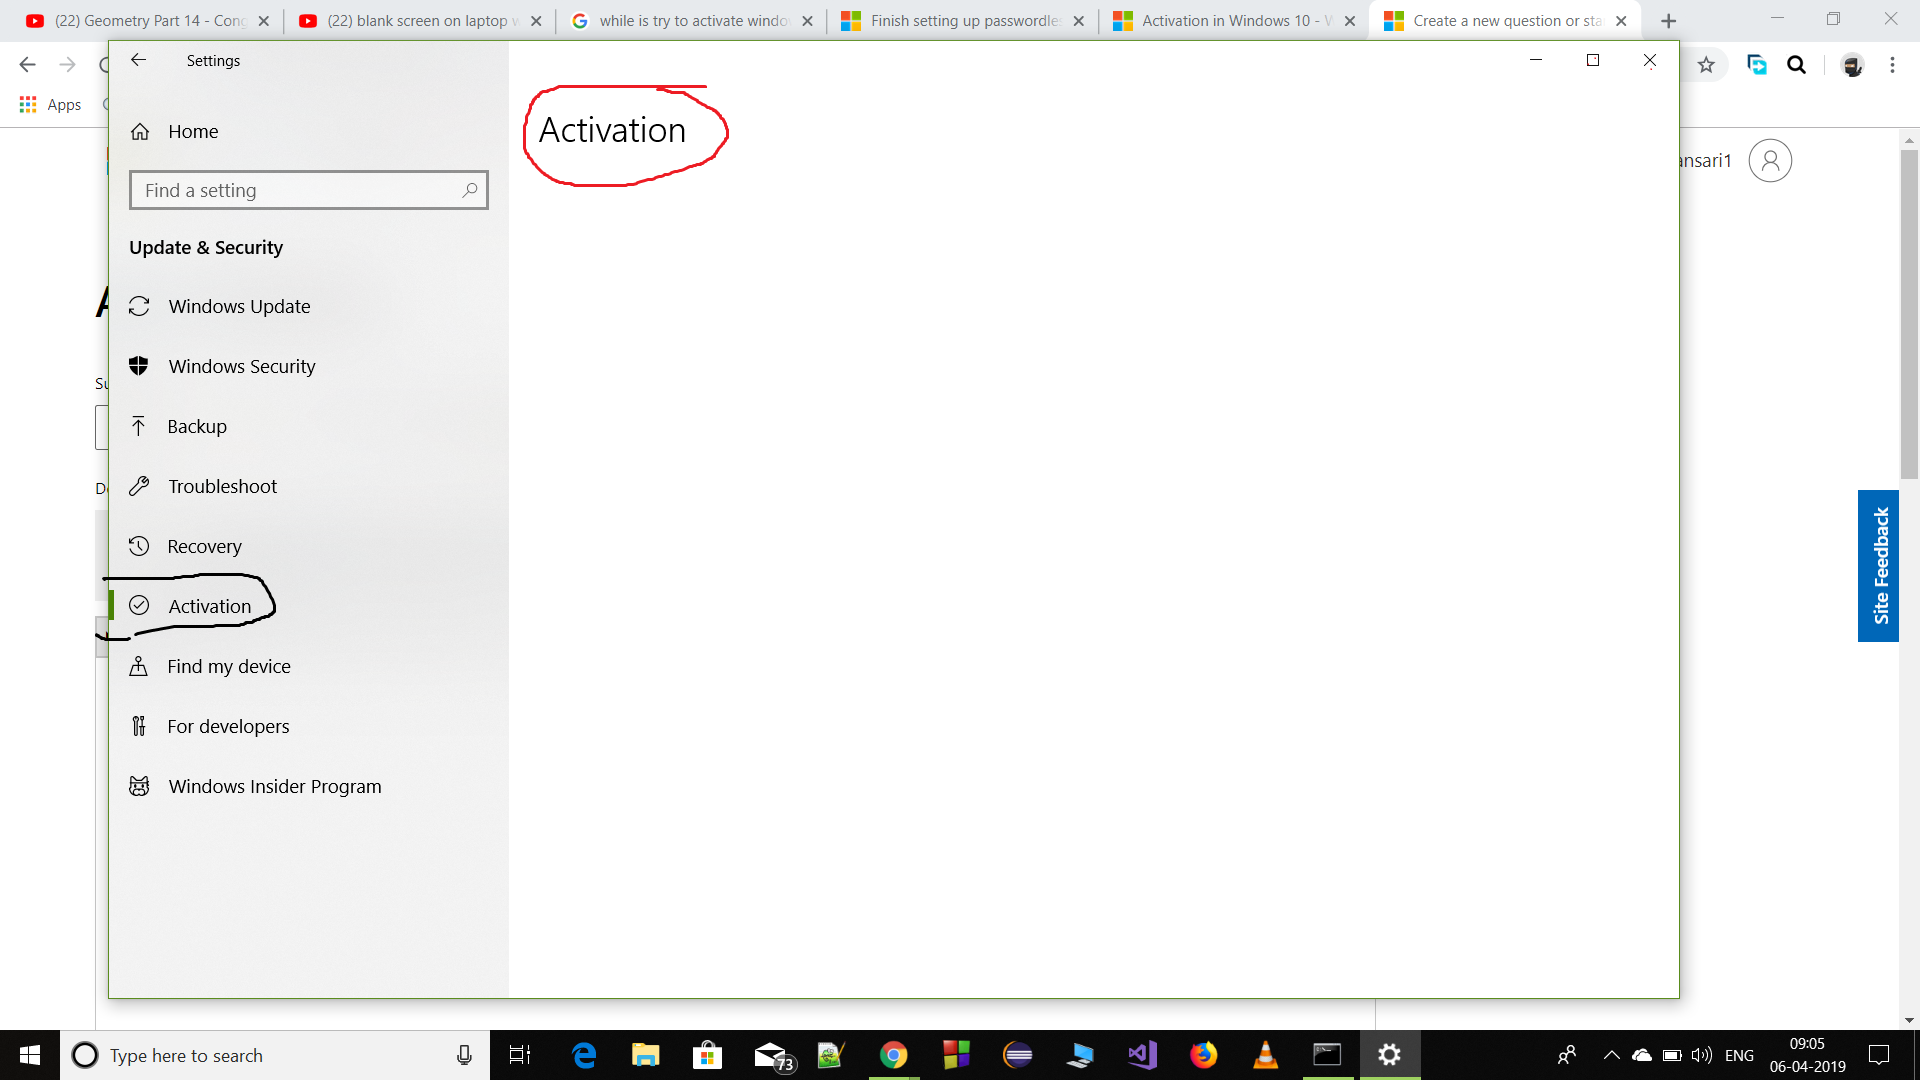 while click on Activation, i just see a blank page 8372f63e-2a46-4dc2-9e0e-dc91cc571cff?upload=true.png